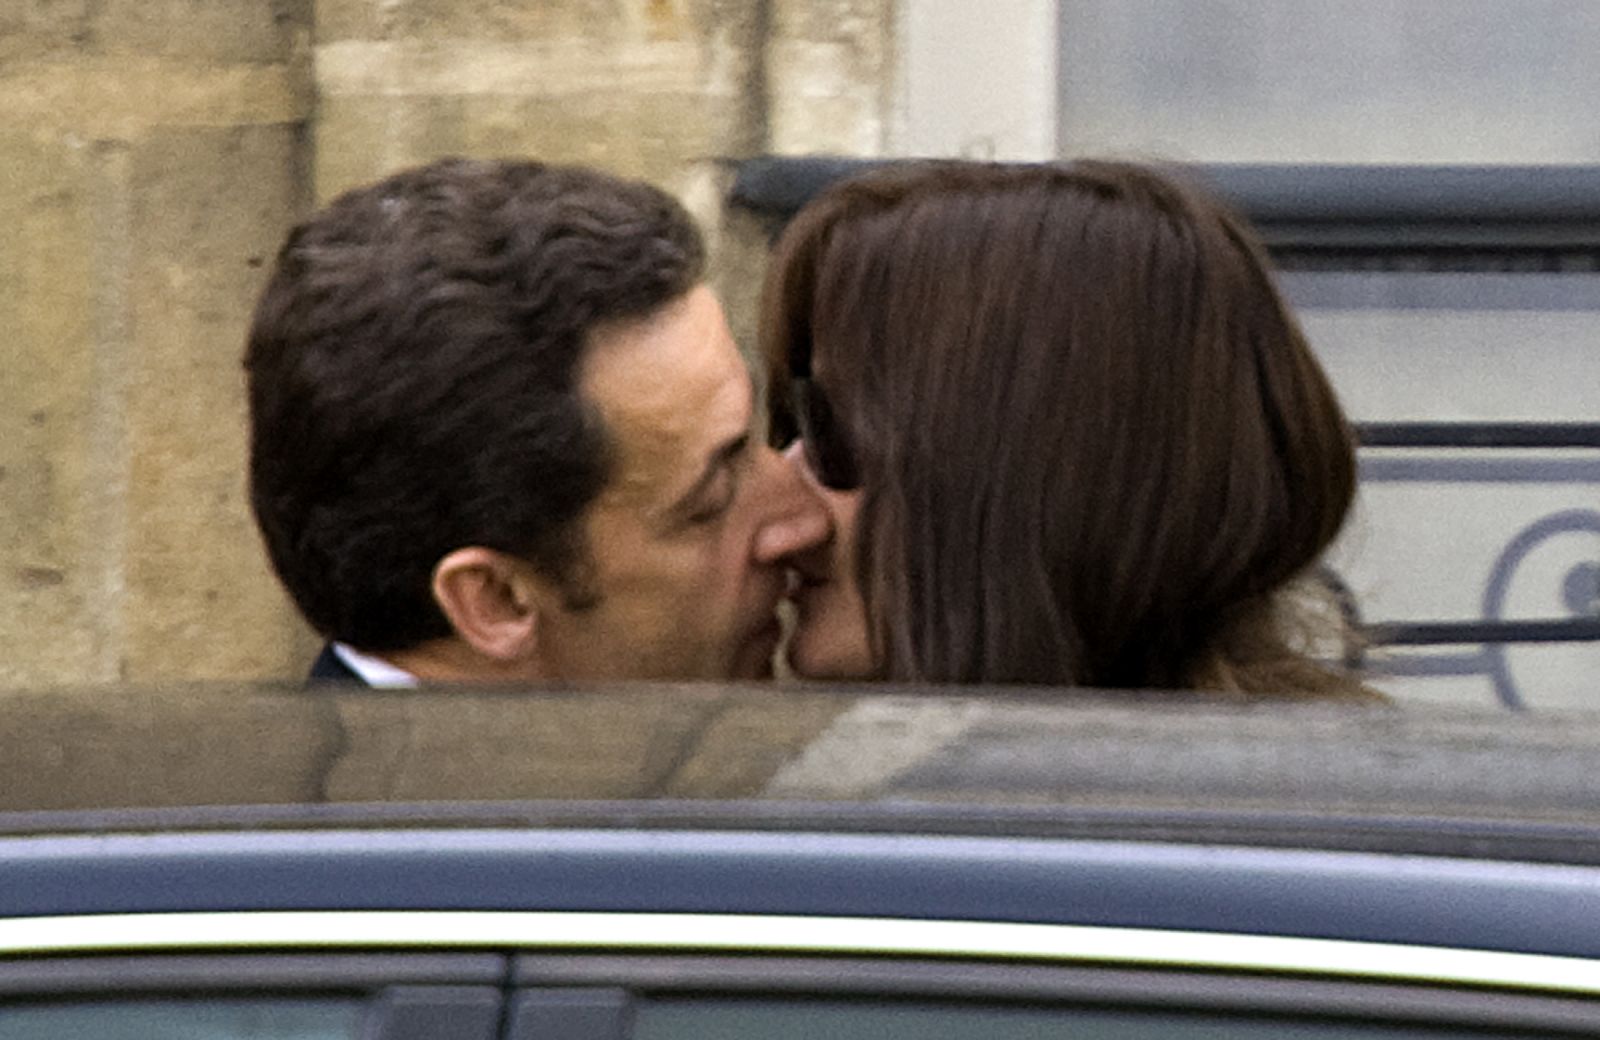 France's President Nicolas Sarkozy kisses first lady Carla Bruni-Sarkozy as they leave the Elysee Palace in Paris